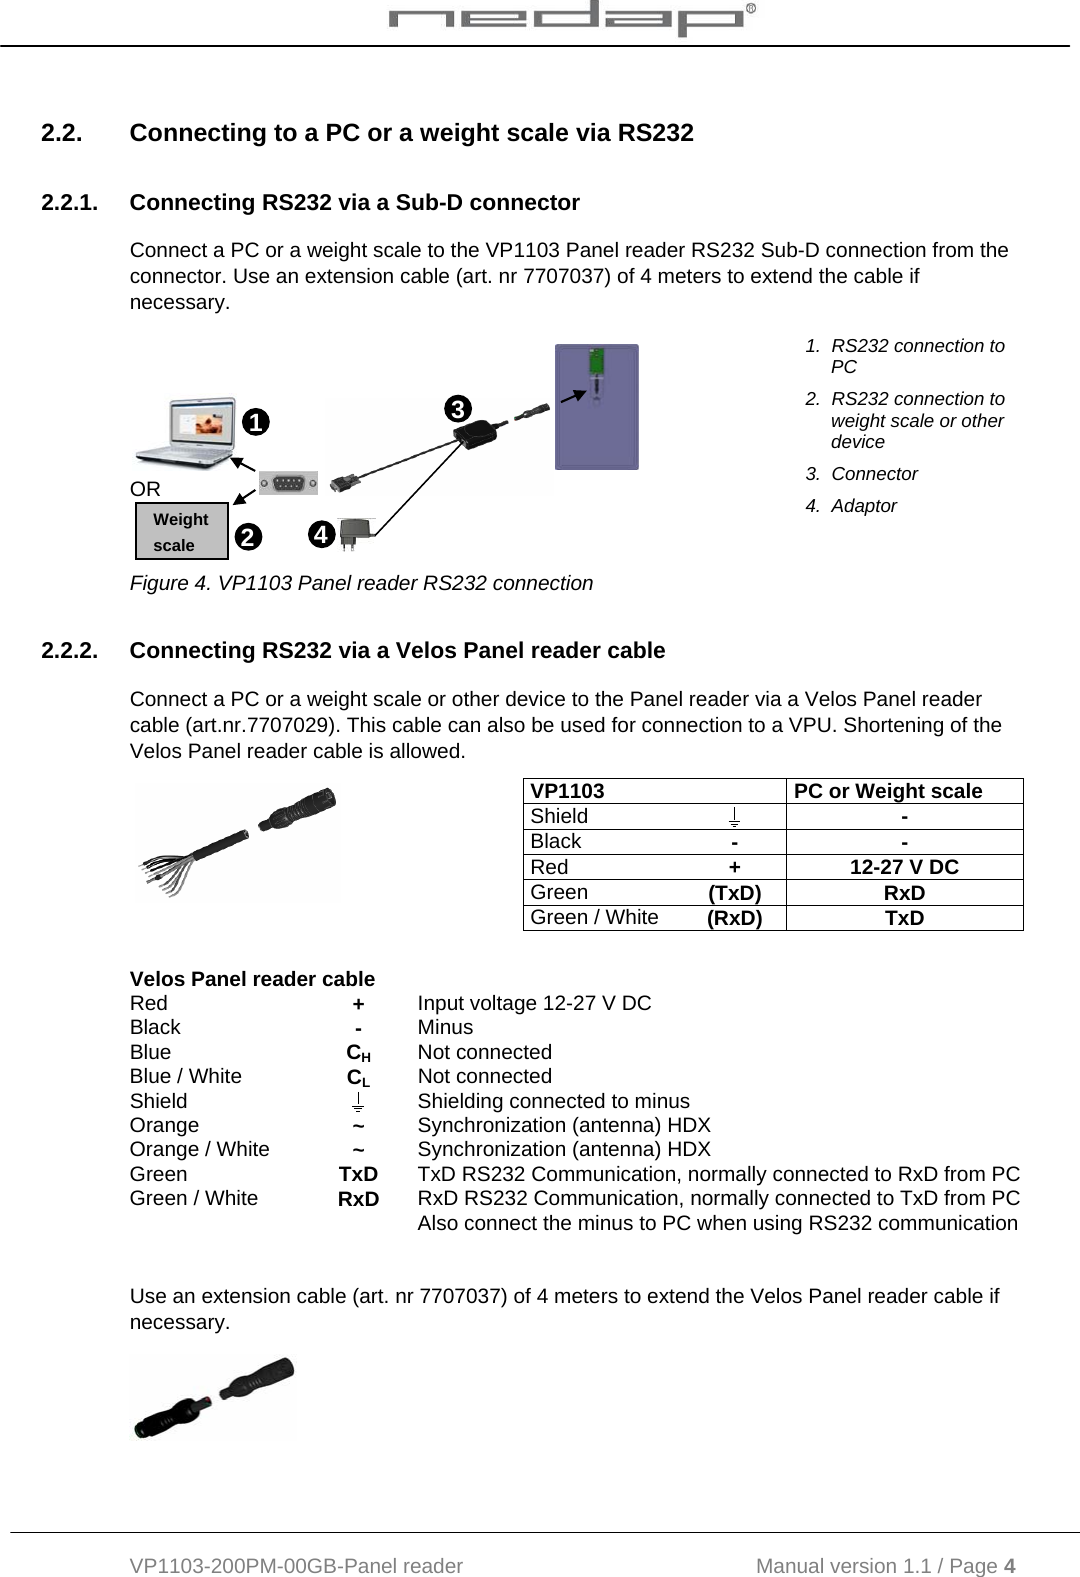  VP1103-200PM-00GB-Panel reader                                           Manual version 1.1 / Page 4  2.2.  Connecting to a PC or a weight scale via RS232 2.2.1.  Connecting RS232 via a Sub-D connector Connect a PC or a weight scale to the VP1103 Panel reader RS232 Sub-D connection from the connector. Use an extension cable (art. nr 7707037) of 4 meters to extend the cable if necessary.     OR    1.  RS232 connection to PC 2.  RS232 connection to weight scale or other device 3.  Connector 4.  Adaptor Figure 4. VP1103 Panel reader RS232 connection 2.2.2.  Connecting RS232 via a Velos Panel reader cable Connect a PC or a weight scale or other device to the Panel reader via a Velos Panel reader cable (art.nr.7707029). This cable can also be used for connection to a VPU. Shortening of the Velos Panel reader cable is allowed.     Use an extension cable (art. nr 7707037) of 4 meters to extend the Velos Panel reader cable if necessary.    VP1103    PC or Weight scale  Shield   - Black  - - Red  +  12-27 V DC Green  (TxD) RxD Green / White  (RxD) TxD Velos Panel reader cable   Red  +  Input voltage 12-27 V DC Black  -  Minus Blue  CH Not connected Blue / White  CL Not connected Shield   Shielding connected to minus Orange  ~  Synchronization (antenna) HDX Orange / White  ~  Synchronization (antenna) HDX Green  TxD  TxD RS232 Communication, normally connected to RxD from PC Green / White  RxD  RxD RS232 Communication, normally connected to TxD from PC   Also connect the minus to PC when using RS232 communication 12 Weight scale 3 4 